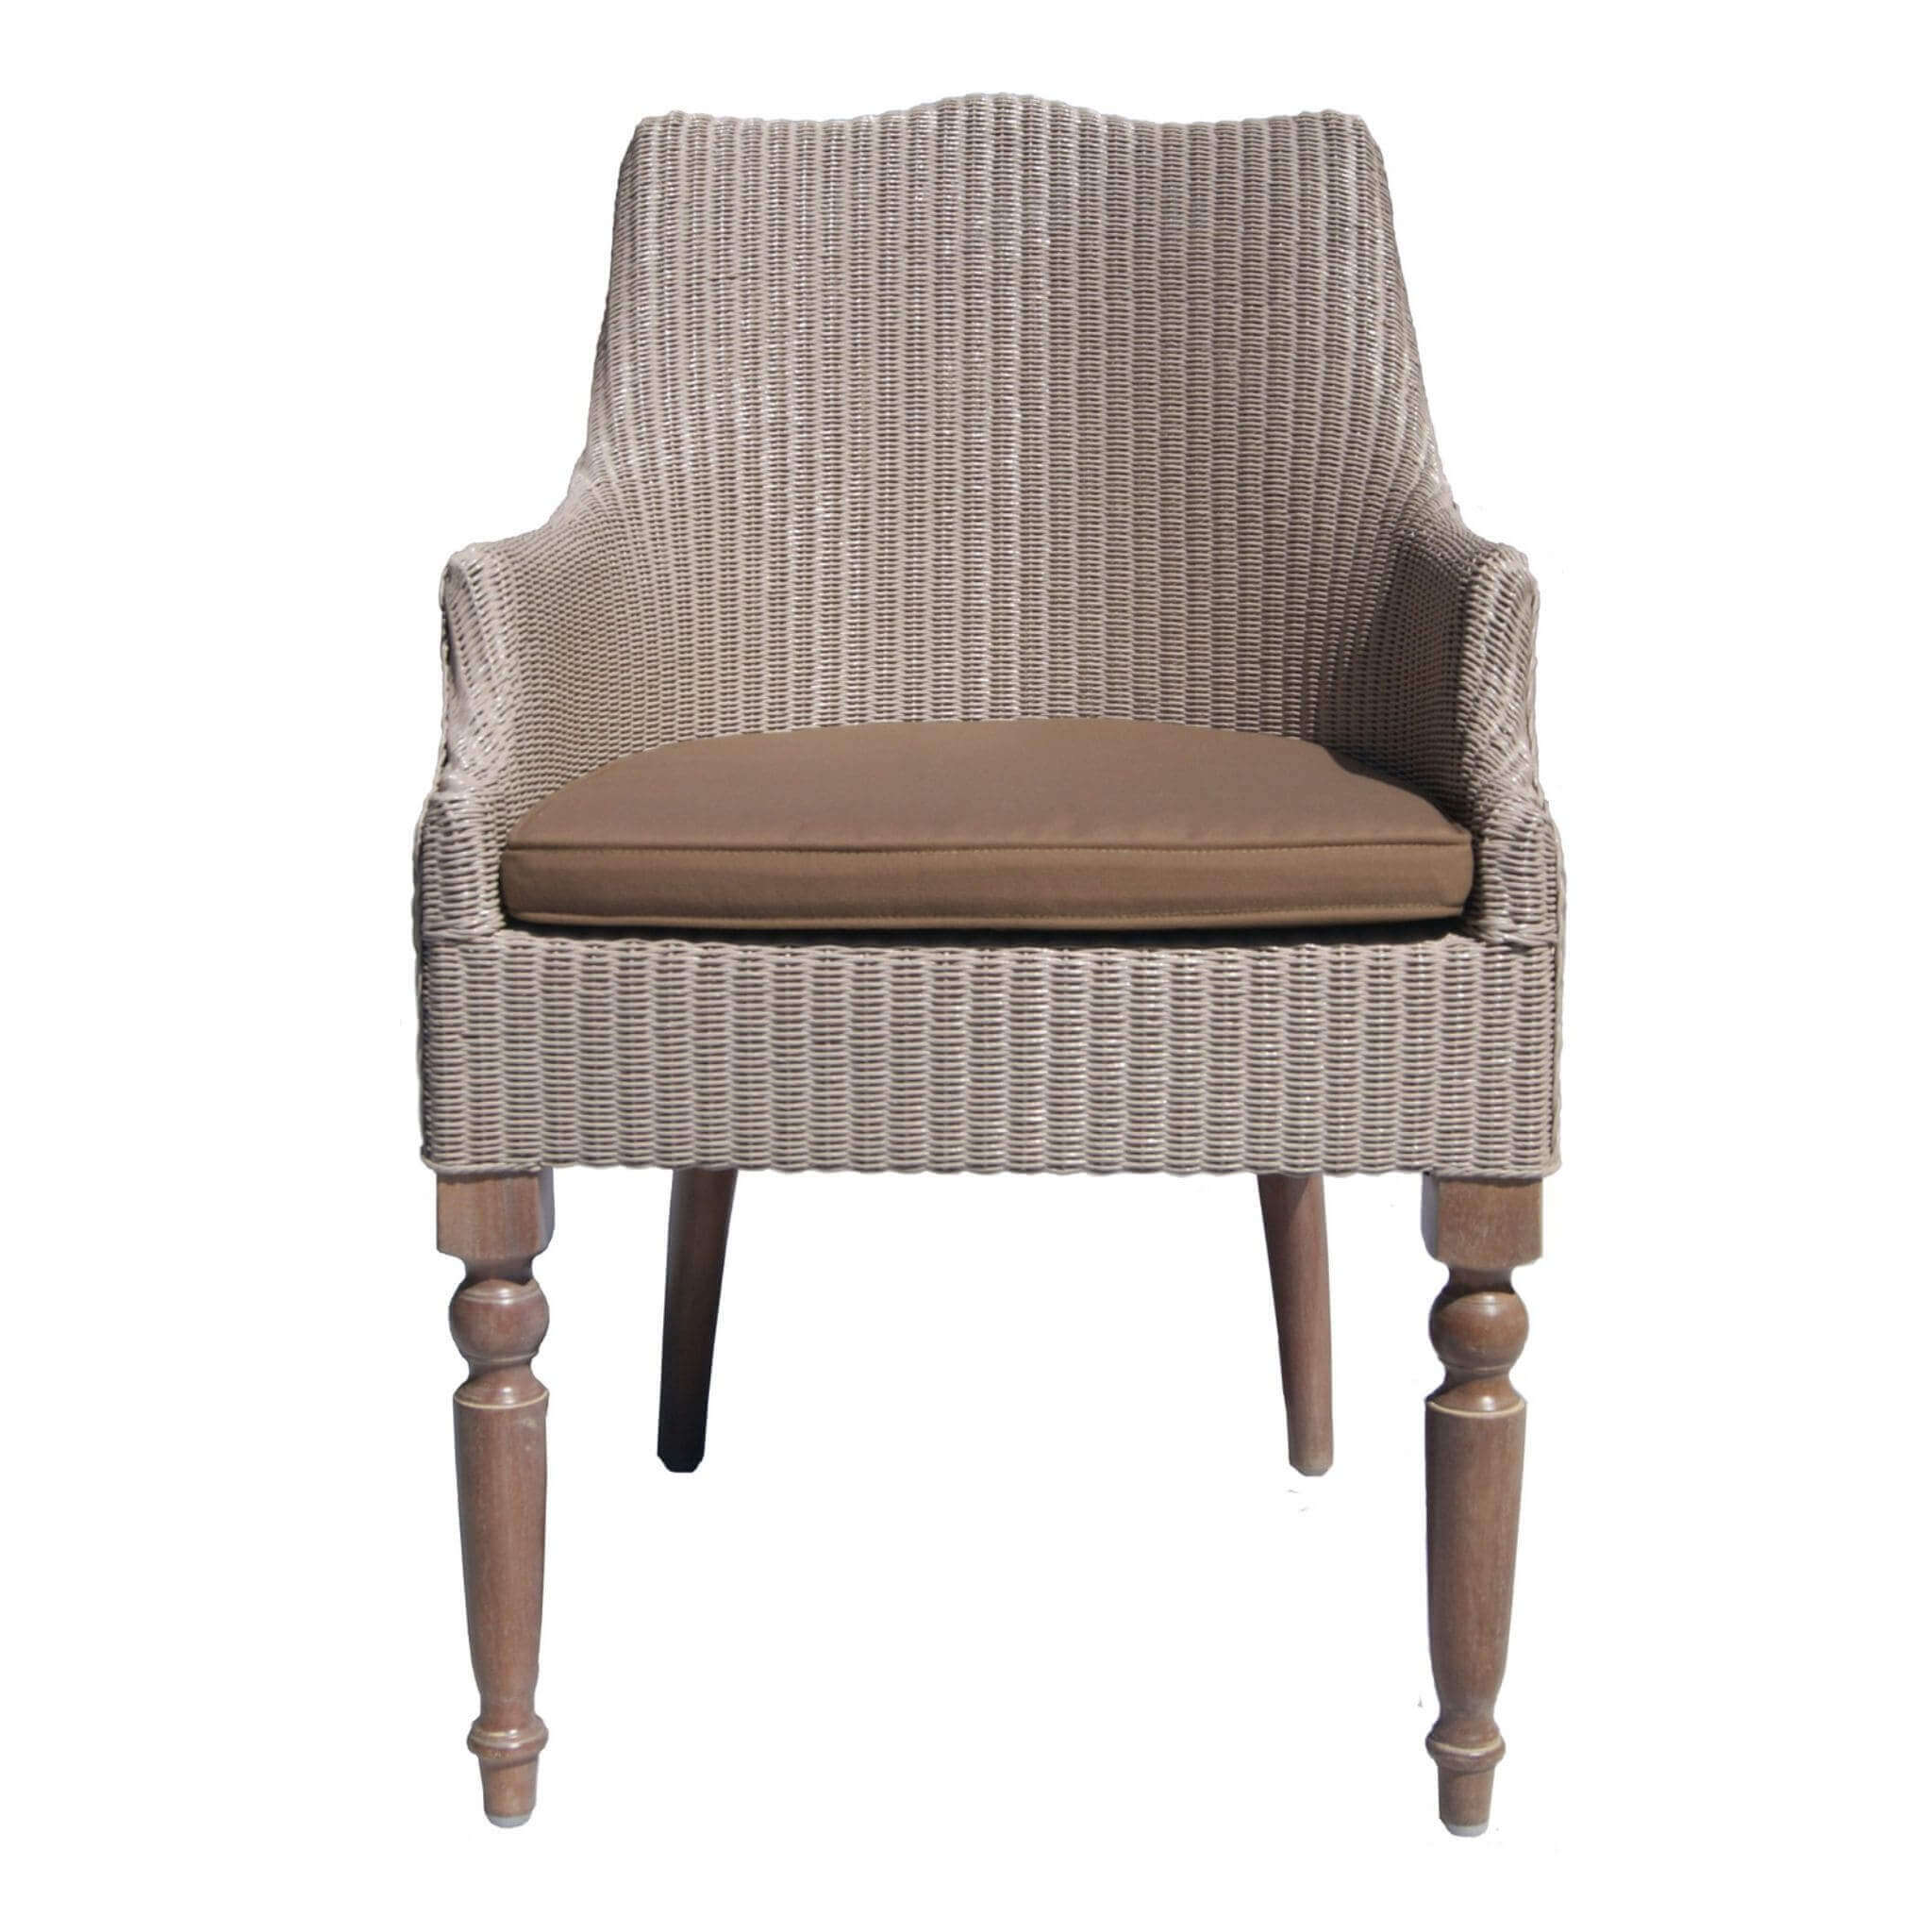 Burgh Lloyd Loom Carver Dining Chair - escapologyhome.co.uk